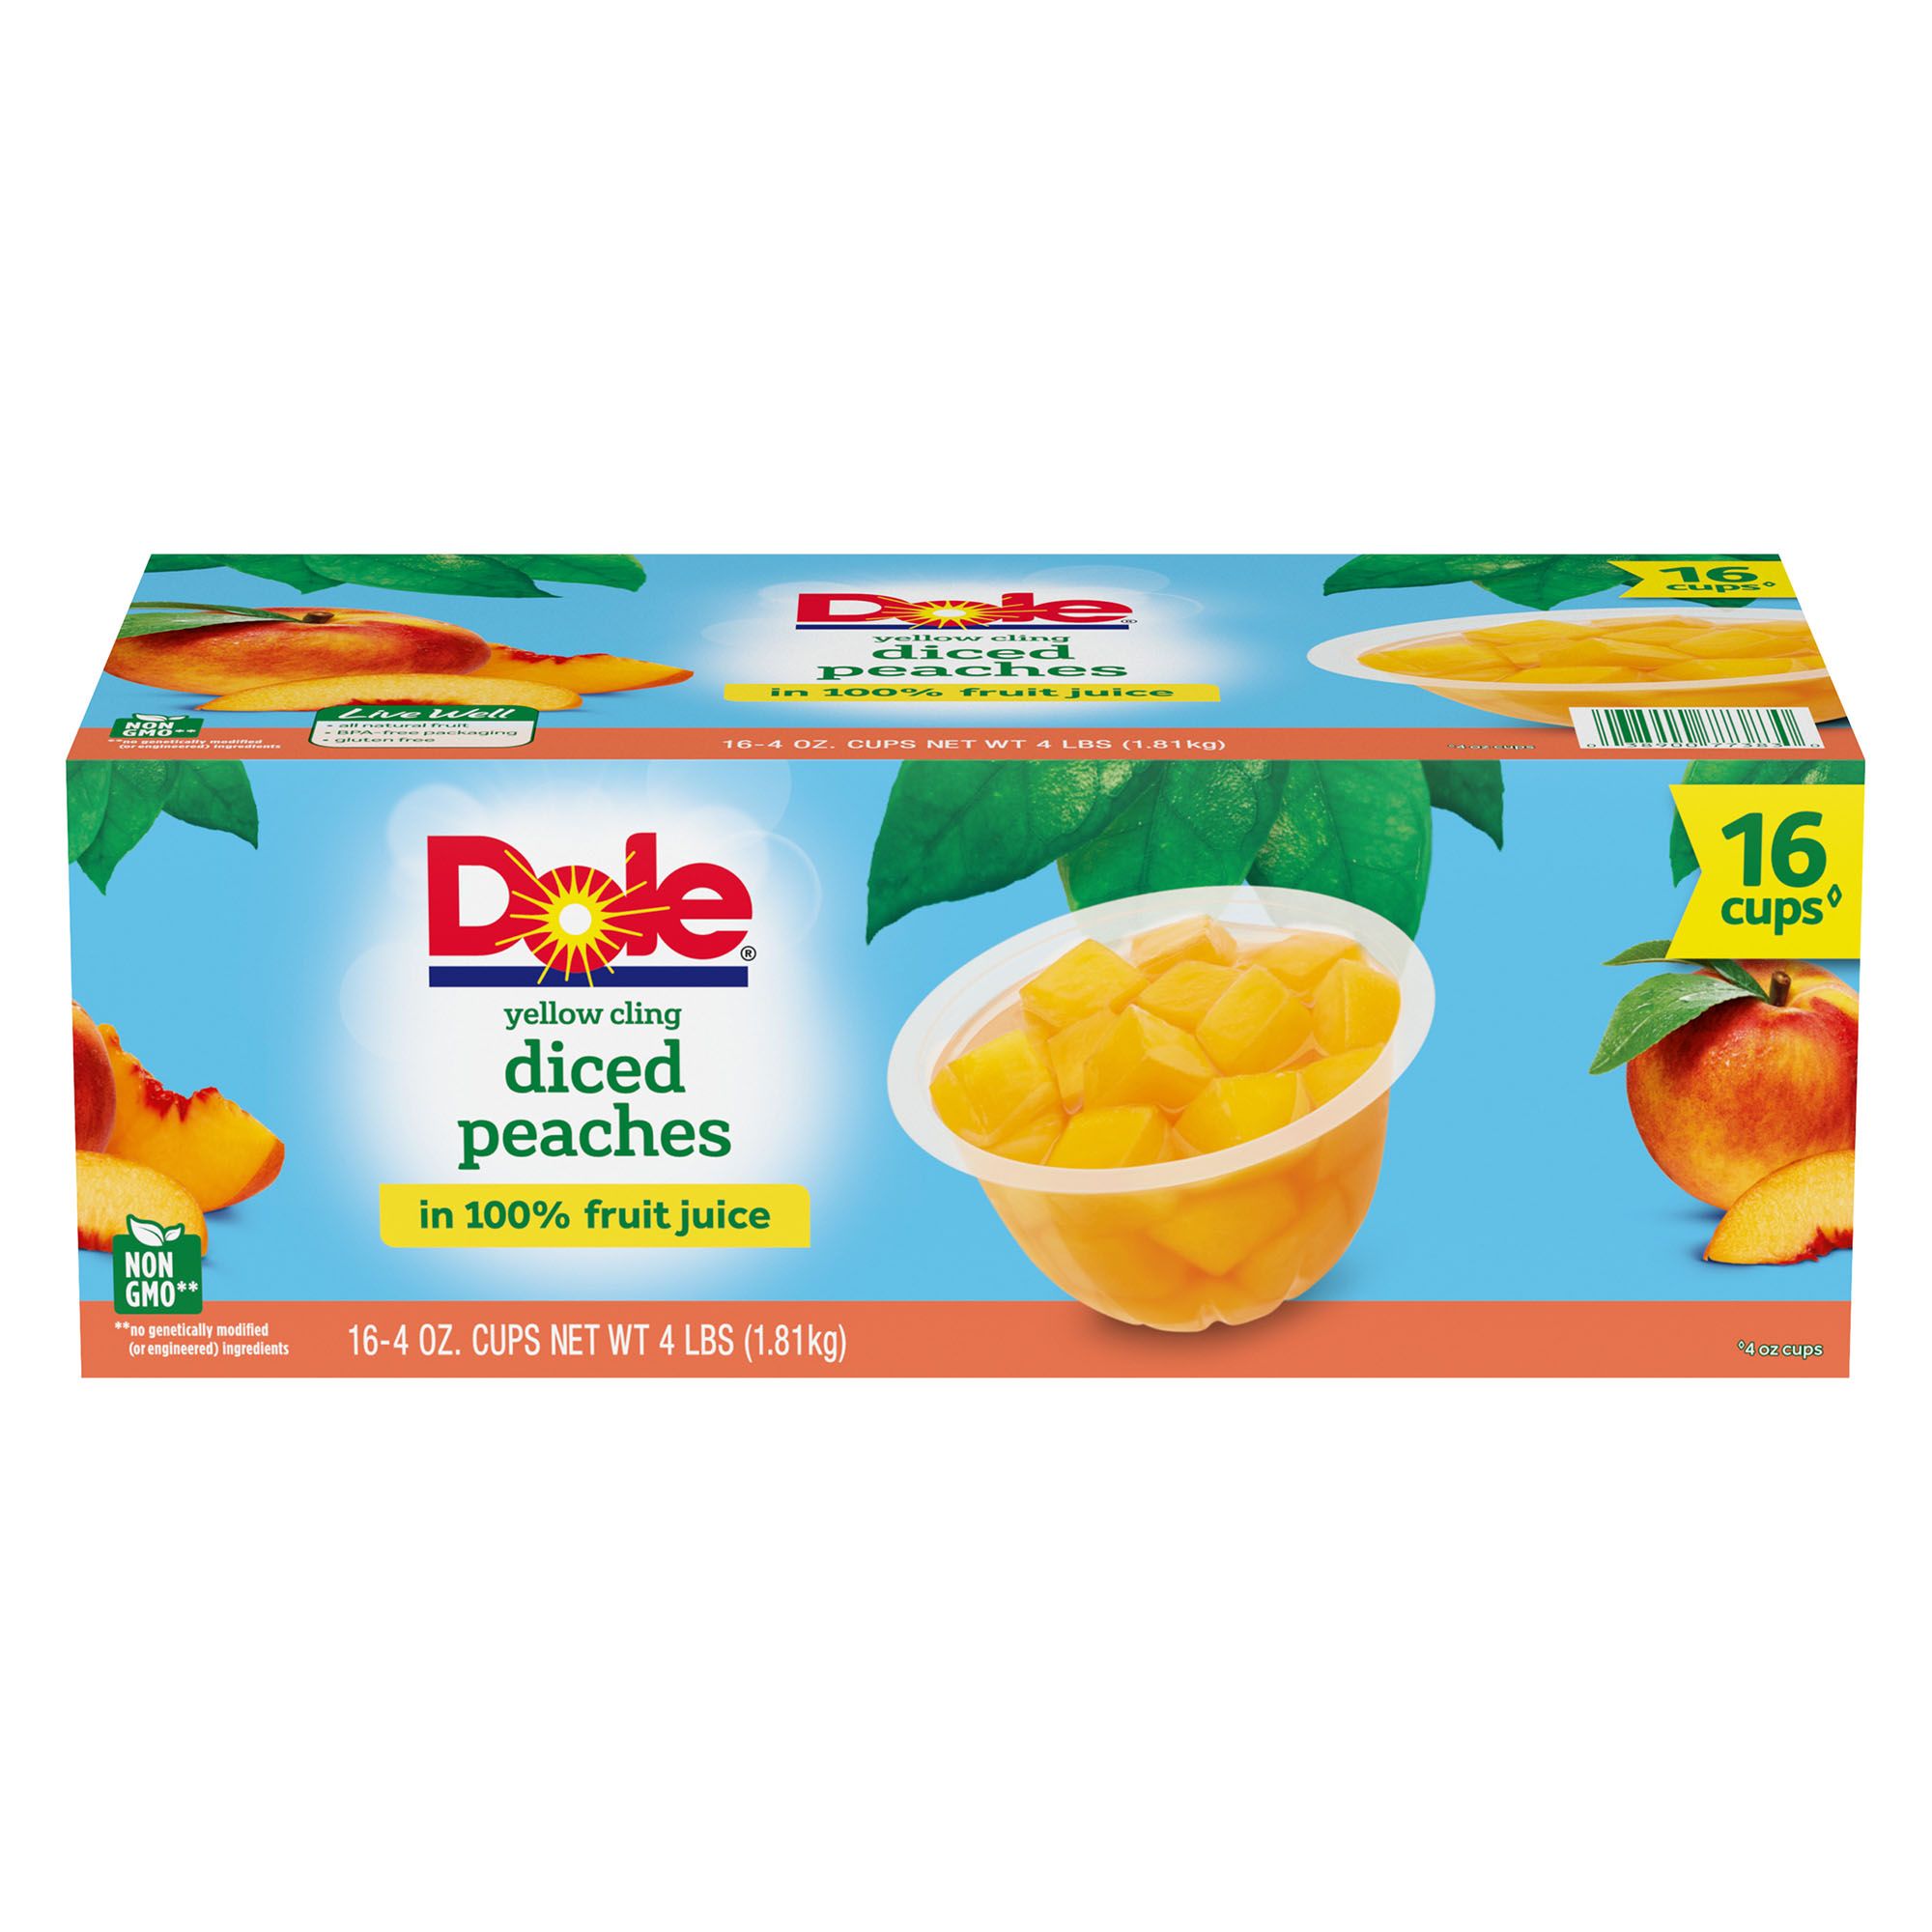 A Fruit Cup with Added Benefits, Introducing New Del Monte® Fruit Infusions